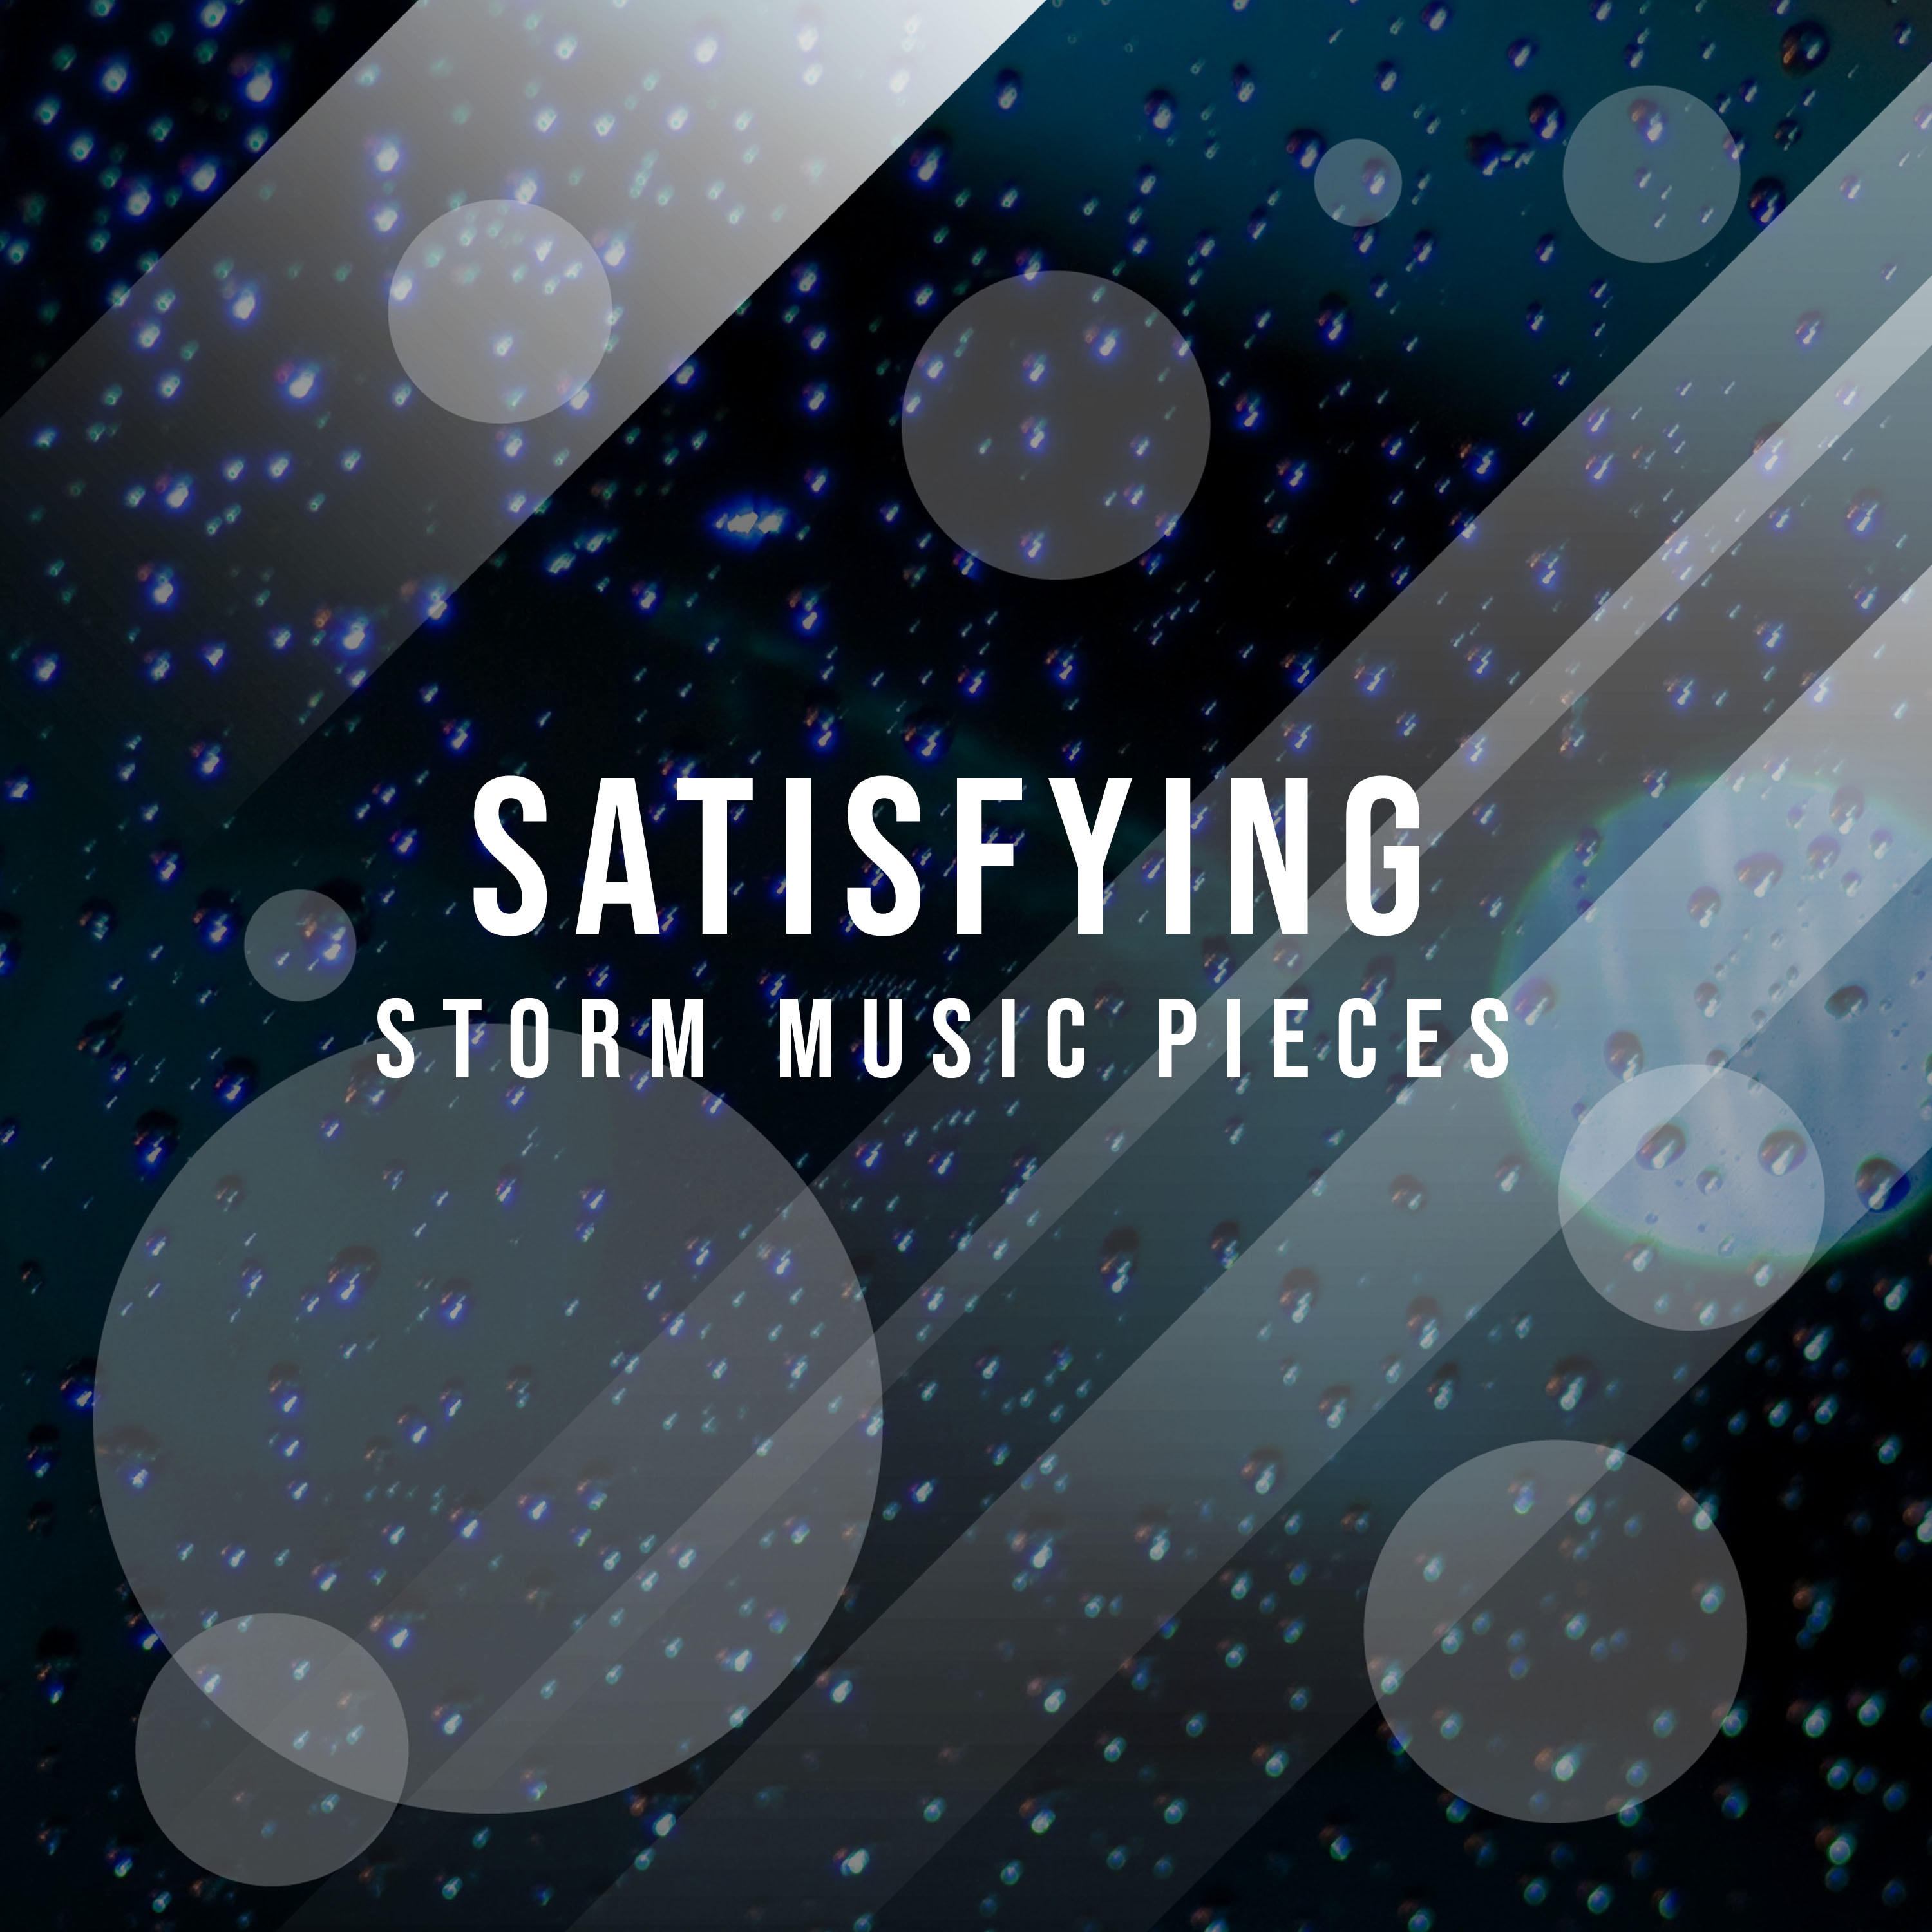 #19 Satisfying Storm Music Pieces